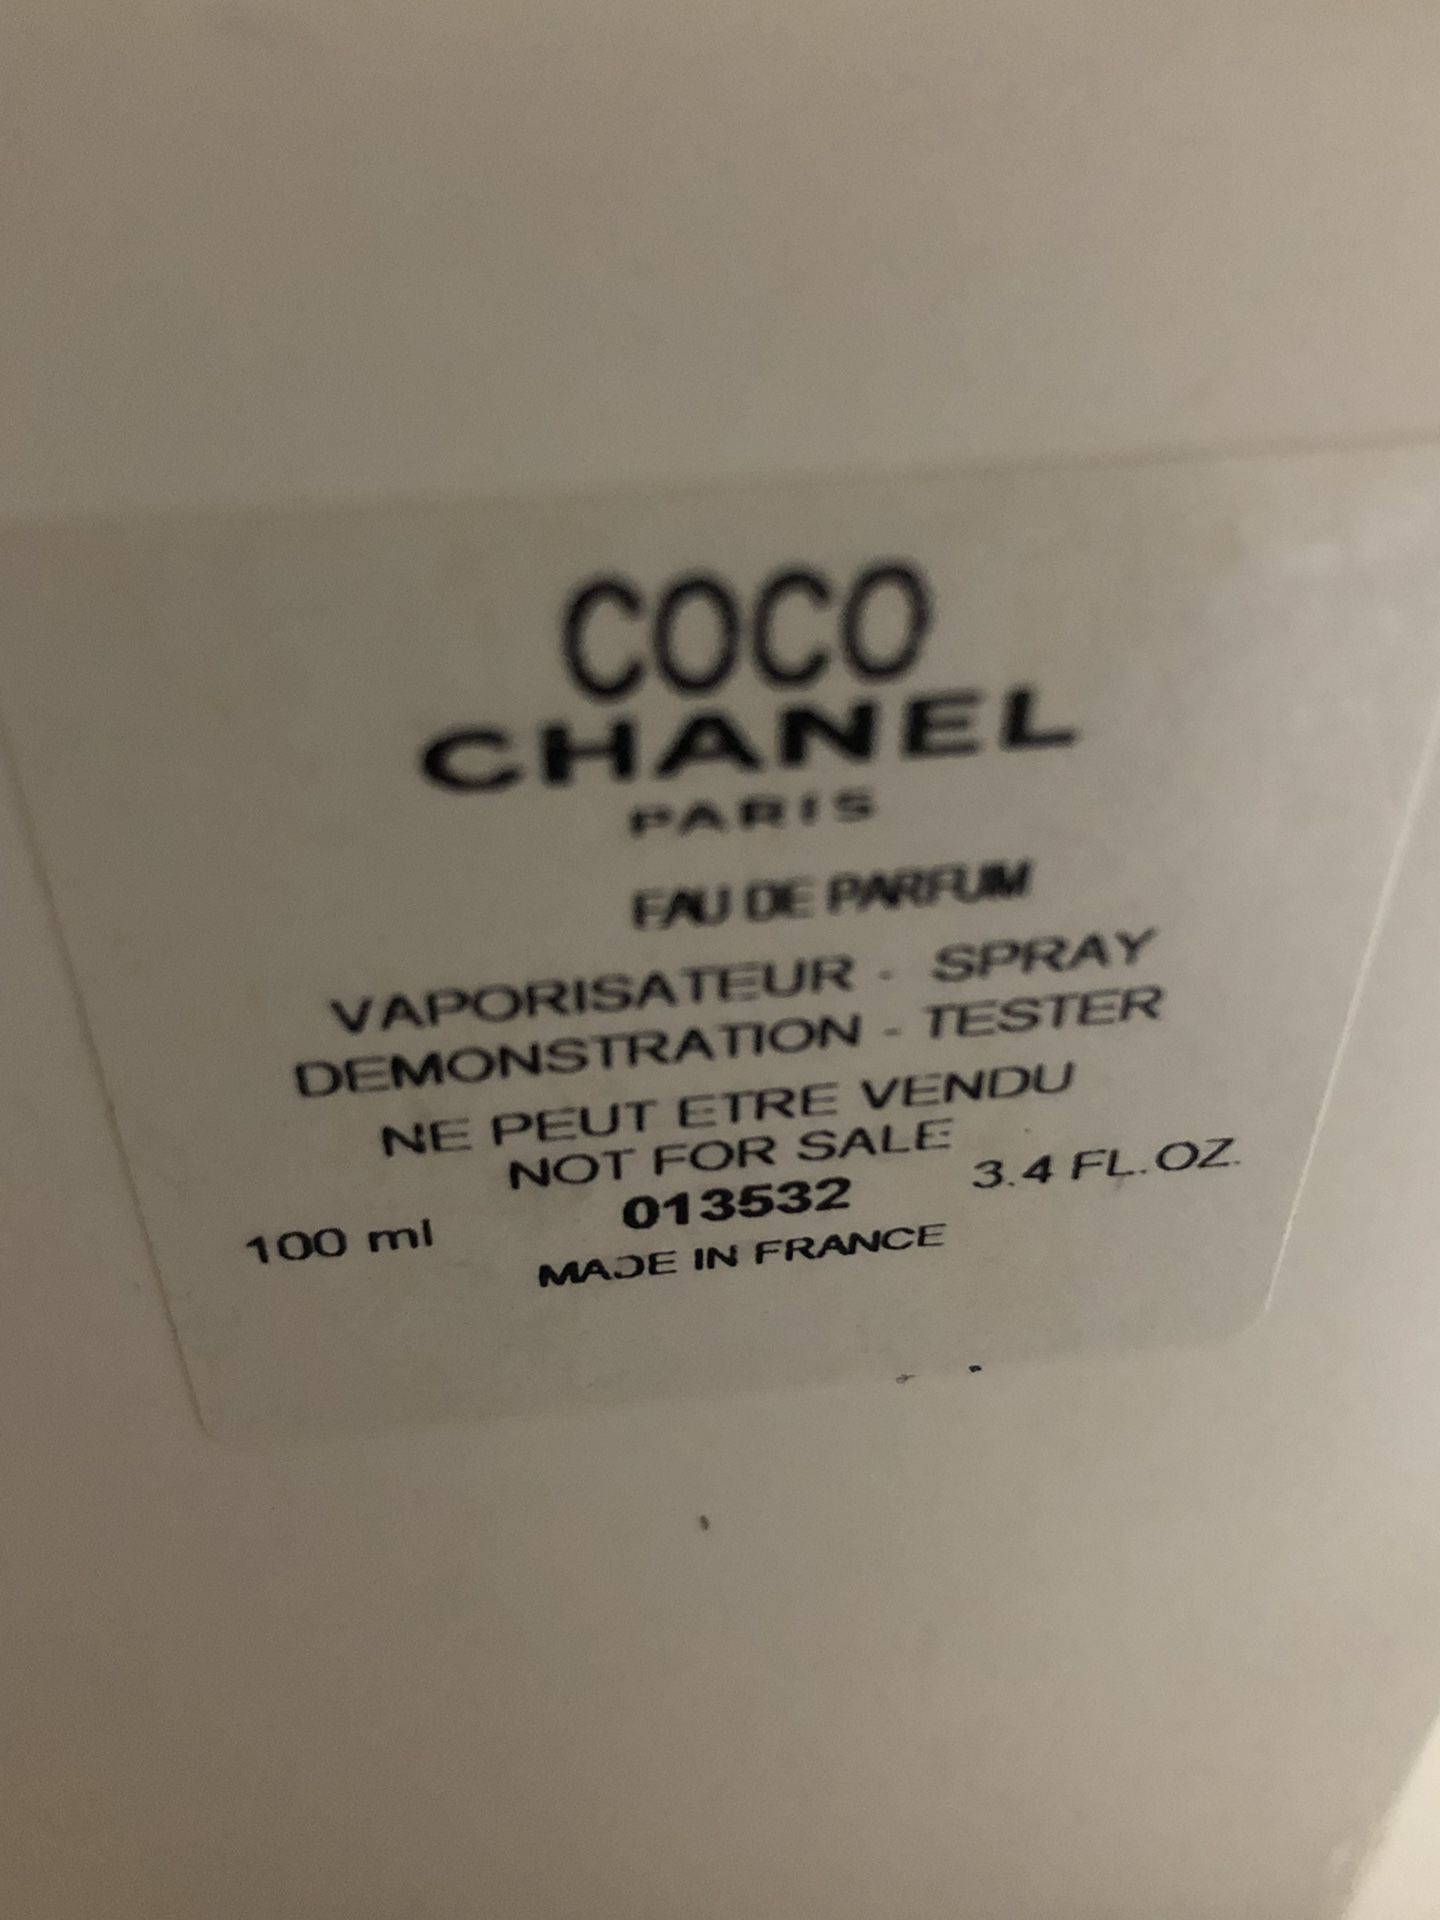 Chanel Coco Eau De Parfum 3.4oz Tester w/ Tester Box (BRAND NEW) 100%  AUTHENTIC! READY TO SHIP! PERFUME for Sale in Philadelphia, PA - OfferUp